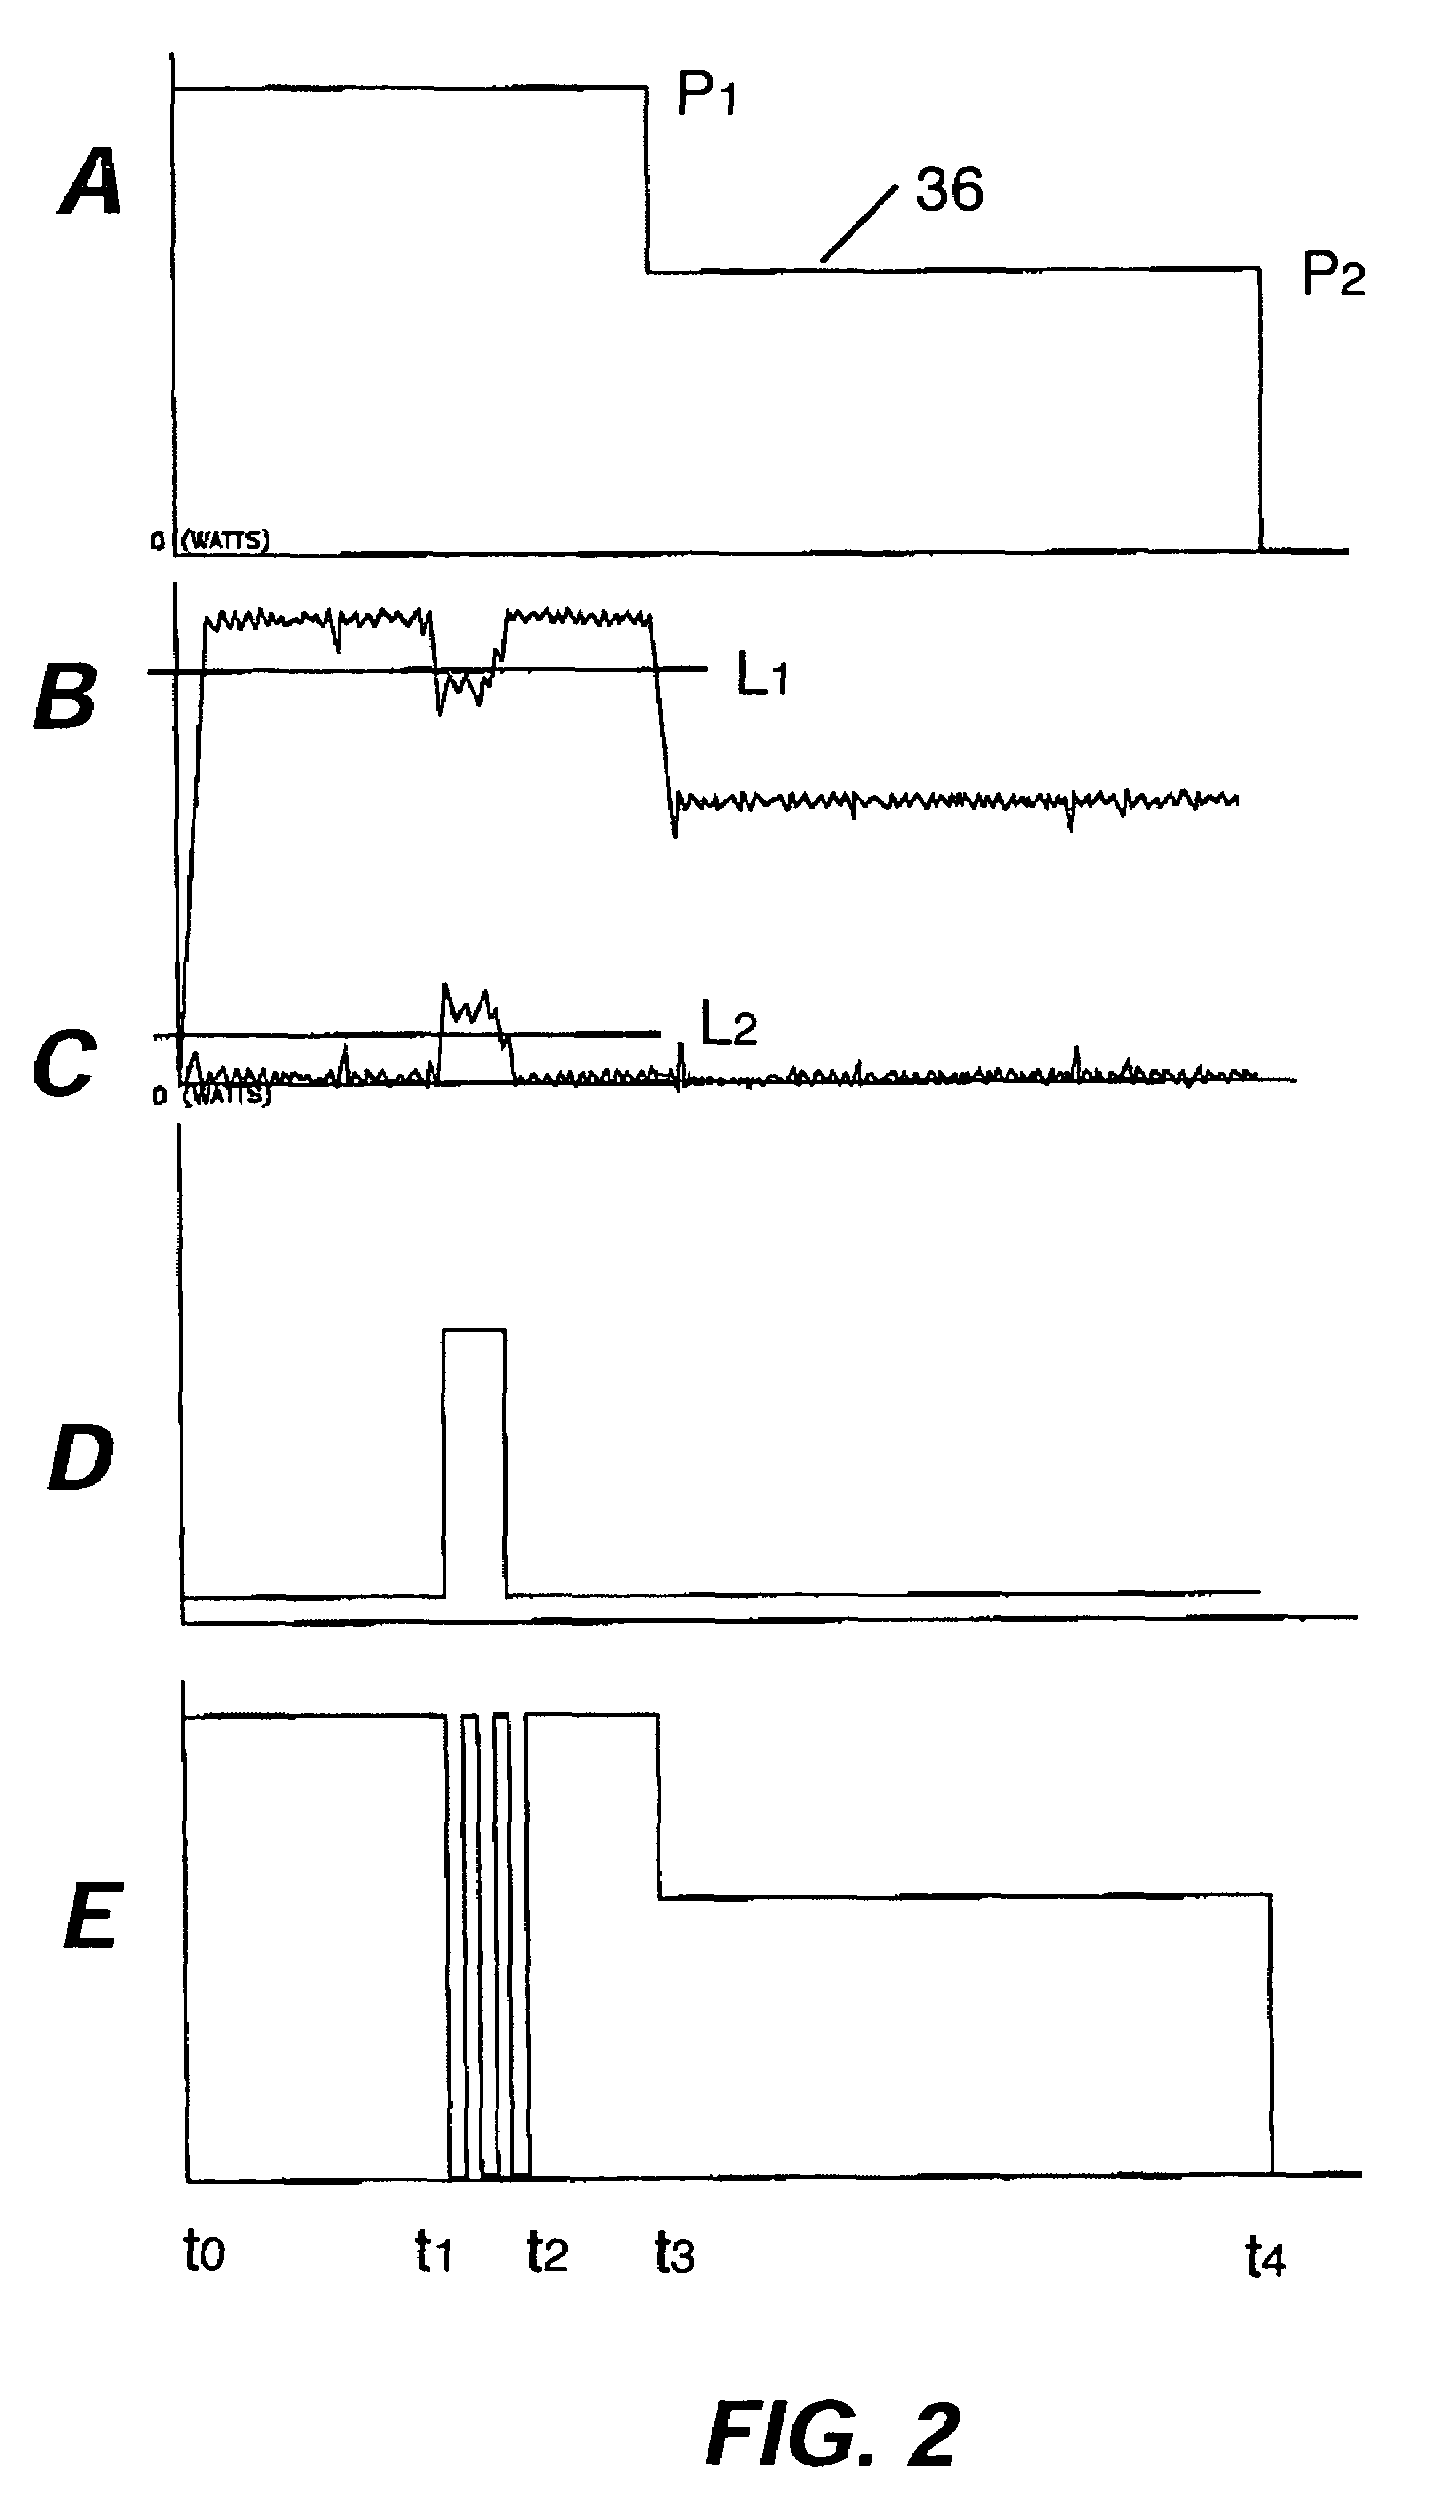 Detection and suppression of electrical arcing